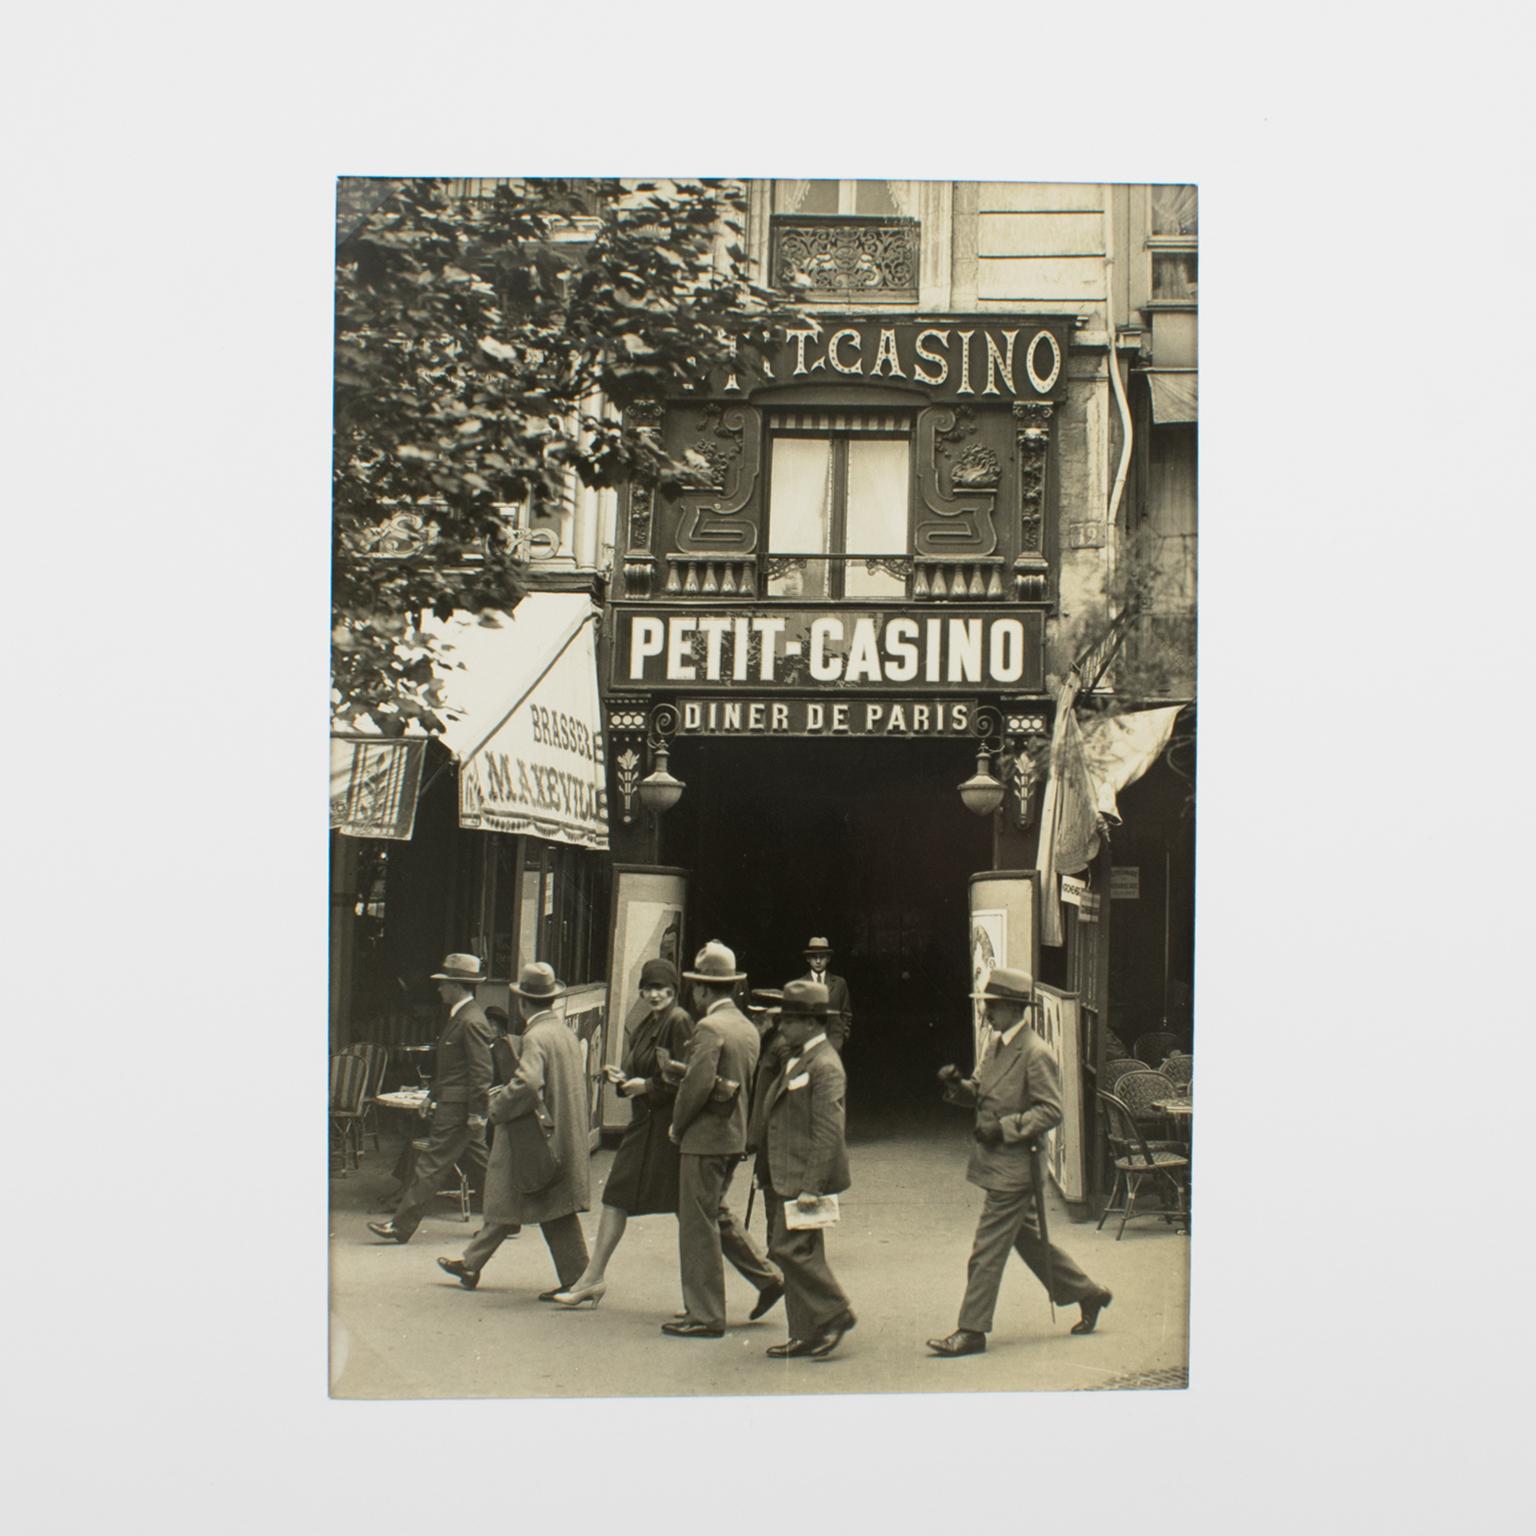 An original silver gelatin black and white photograph by Wide World Photos, Paris. A street view of Boulevard Montmartre in Paris, circa 1930.
Features:
Original Silver Gelatin Print Photograph Unframed.
Press Photograph.
Press Agency: Wide World